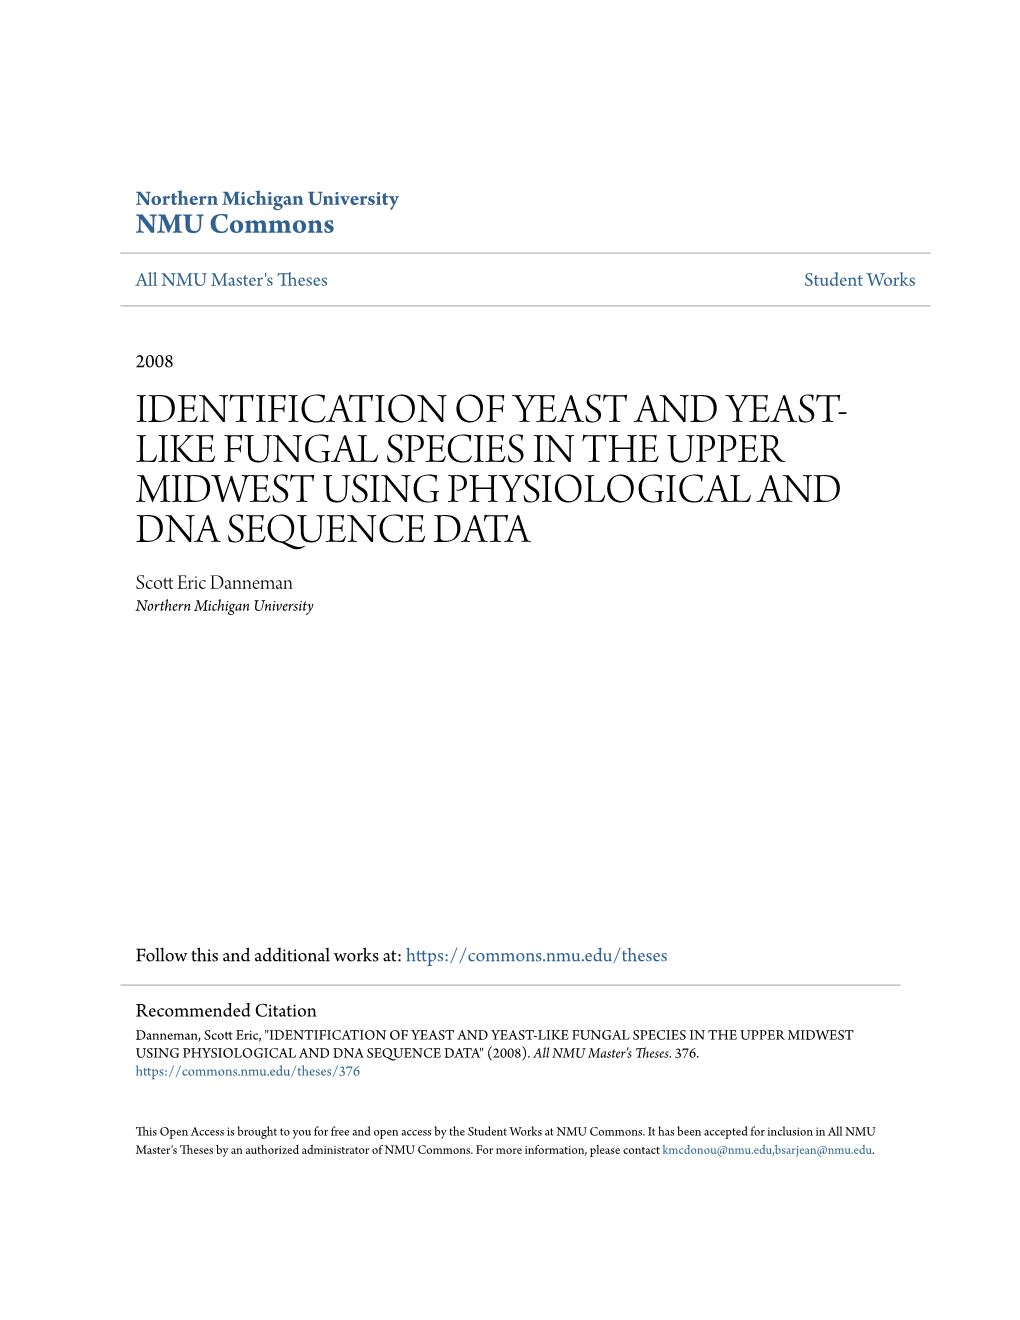 Identification of Yeast and Yeast-Like Fungal Species in the Upper Midwest Using Physiological and Dna Sequence Data" (2008)